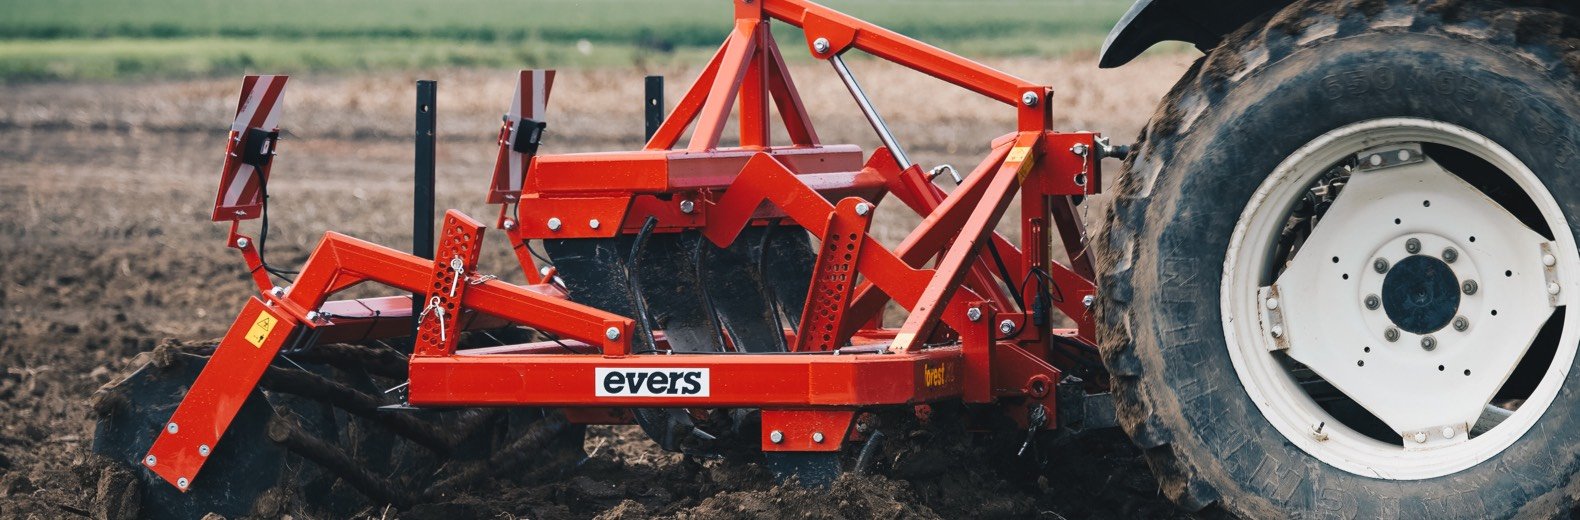 Agri-Trade Equipment Expo  - Evers Agro